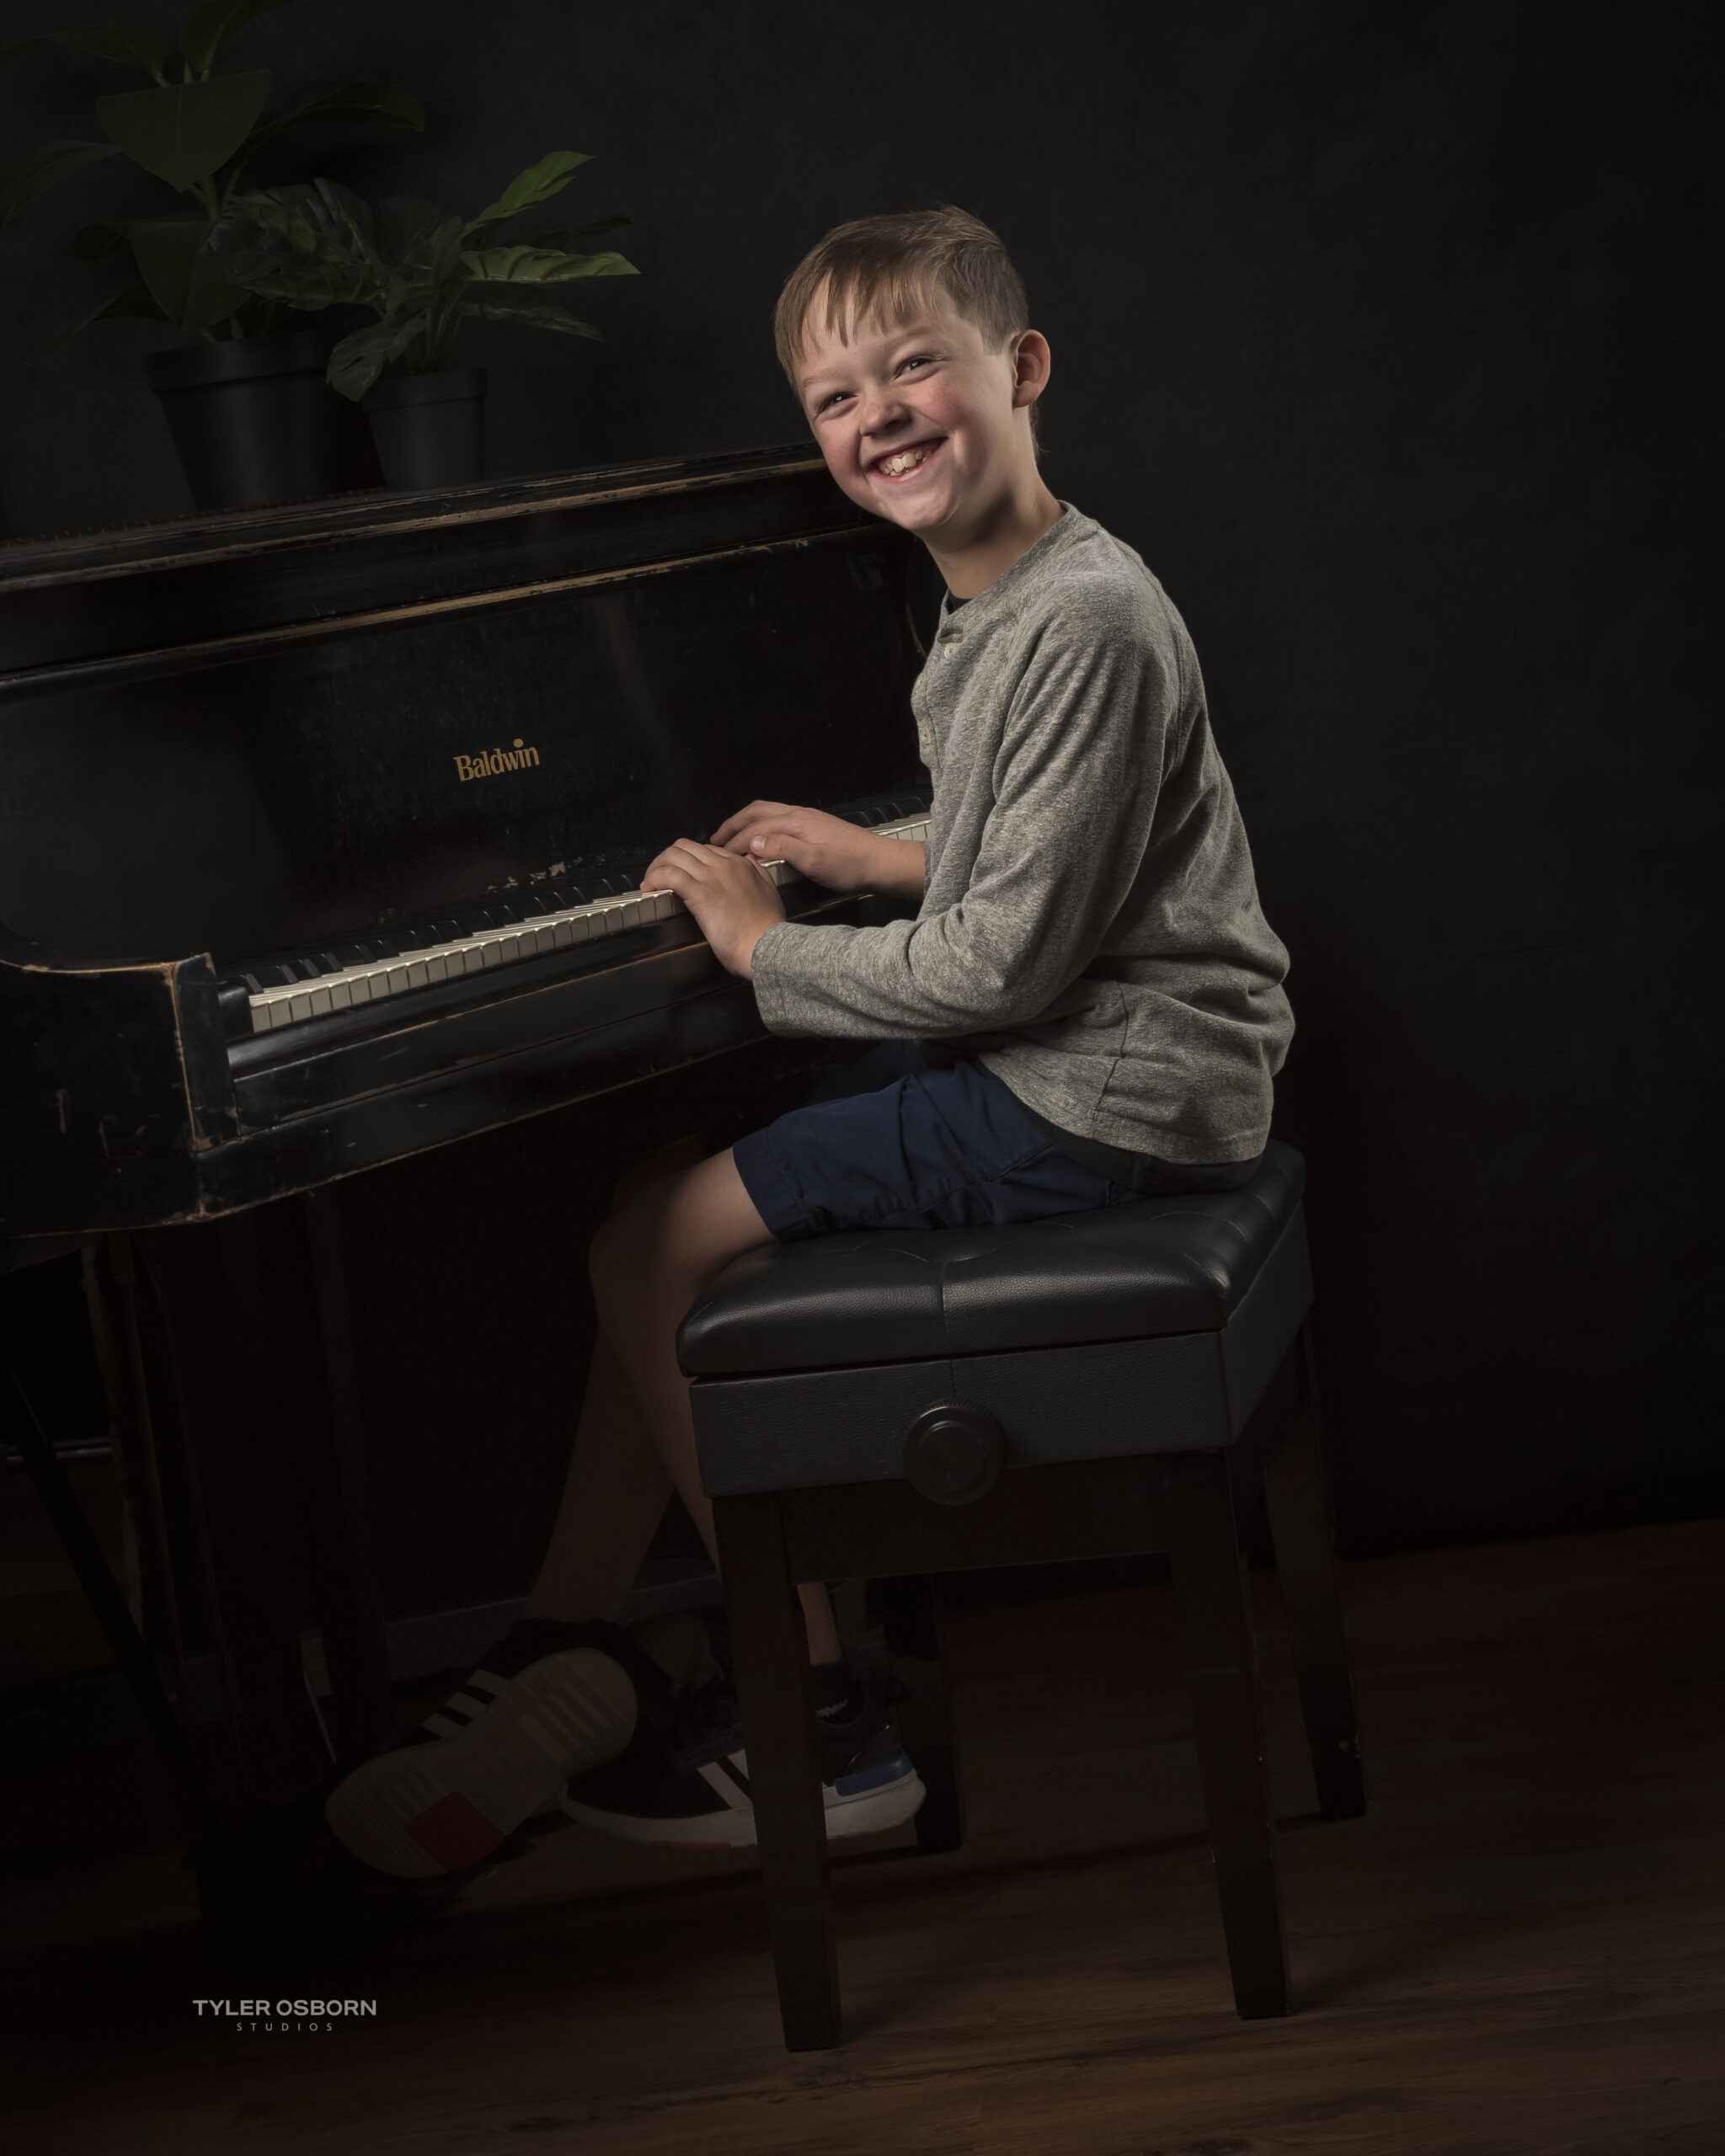 TOS Music lessons near me music store st joseph mo guitar lessons near me piano lessons st joseph mo drum lessons near me violin lessons